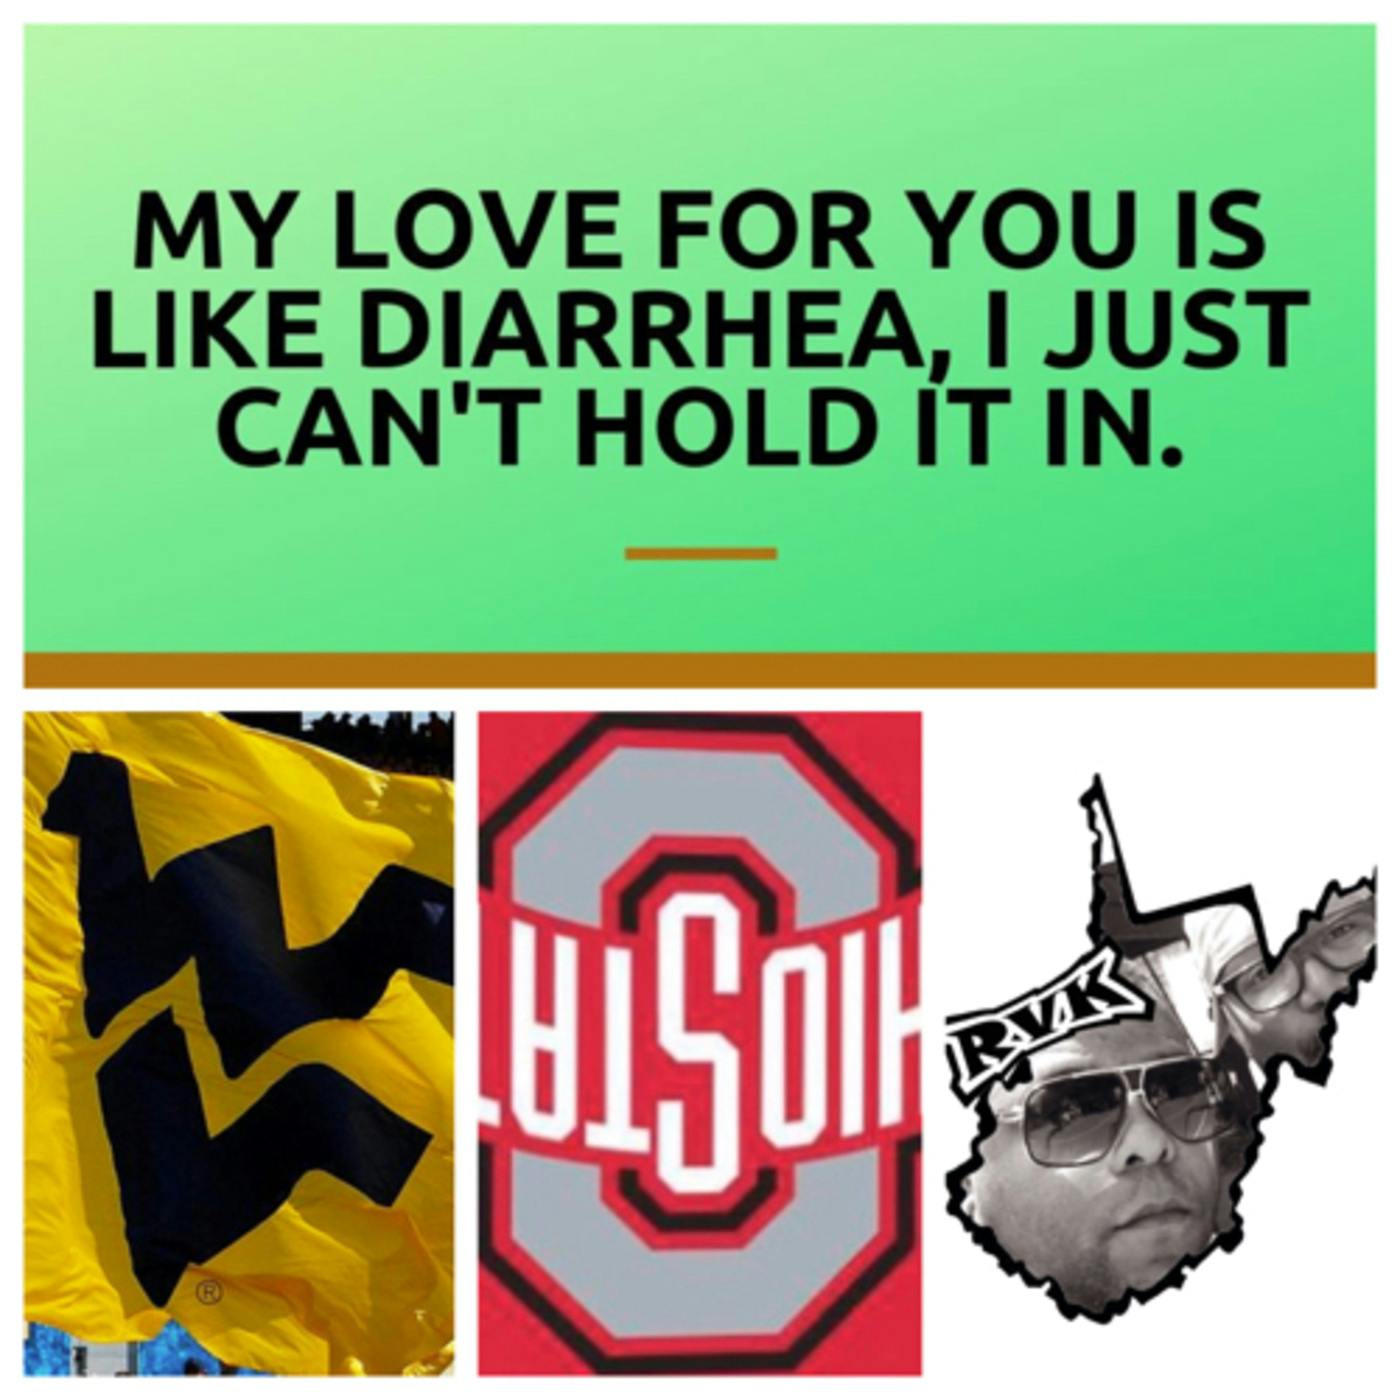 Ep. 143 - Pickup Lines, 2019, and Why We Hate Ohio State